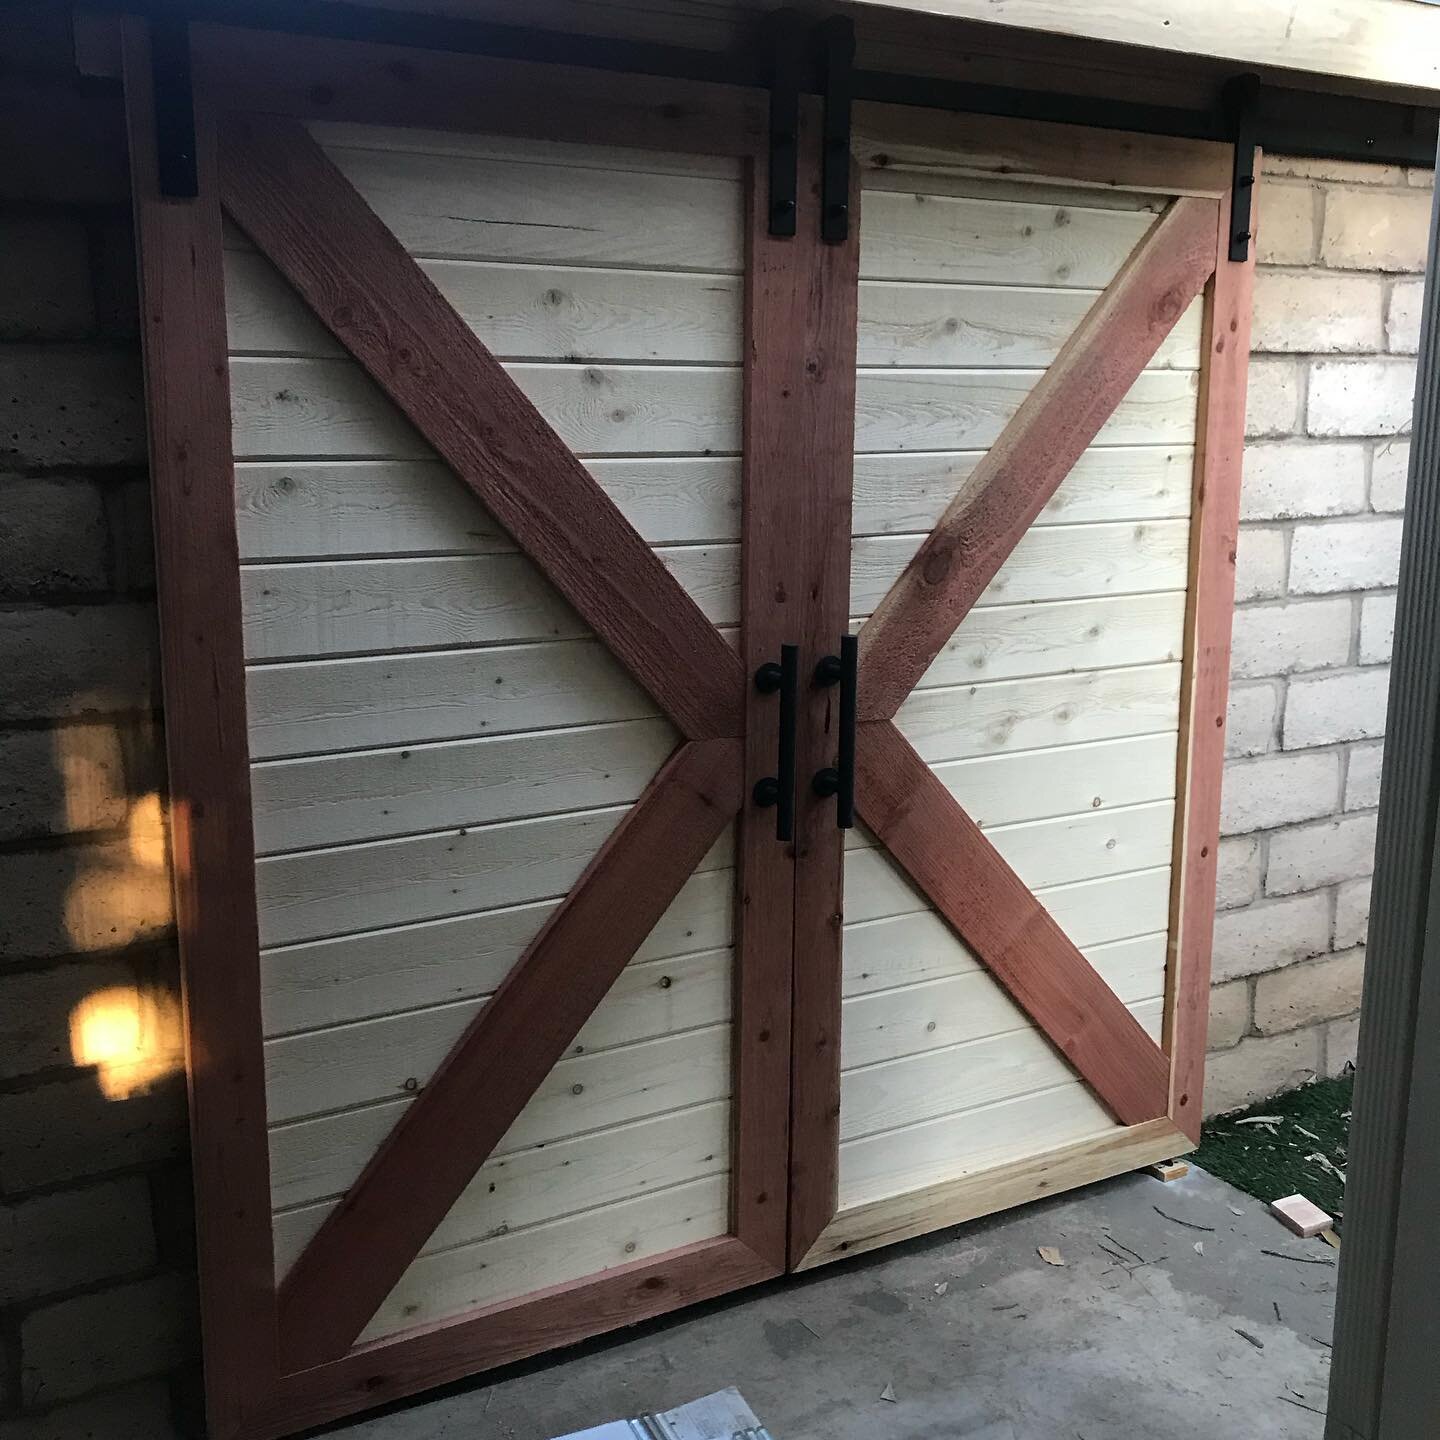 A pair of Barn Doors, built from scratch, to finish off the shed #bennettshomesolutions